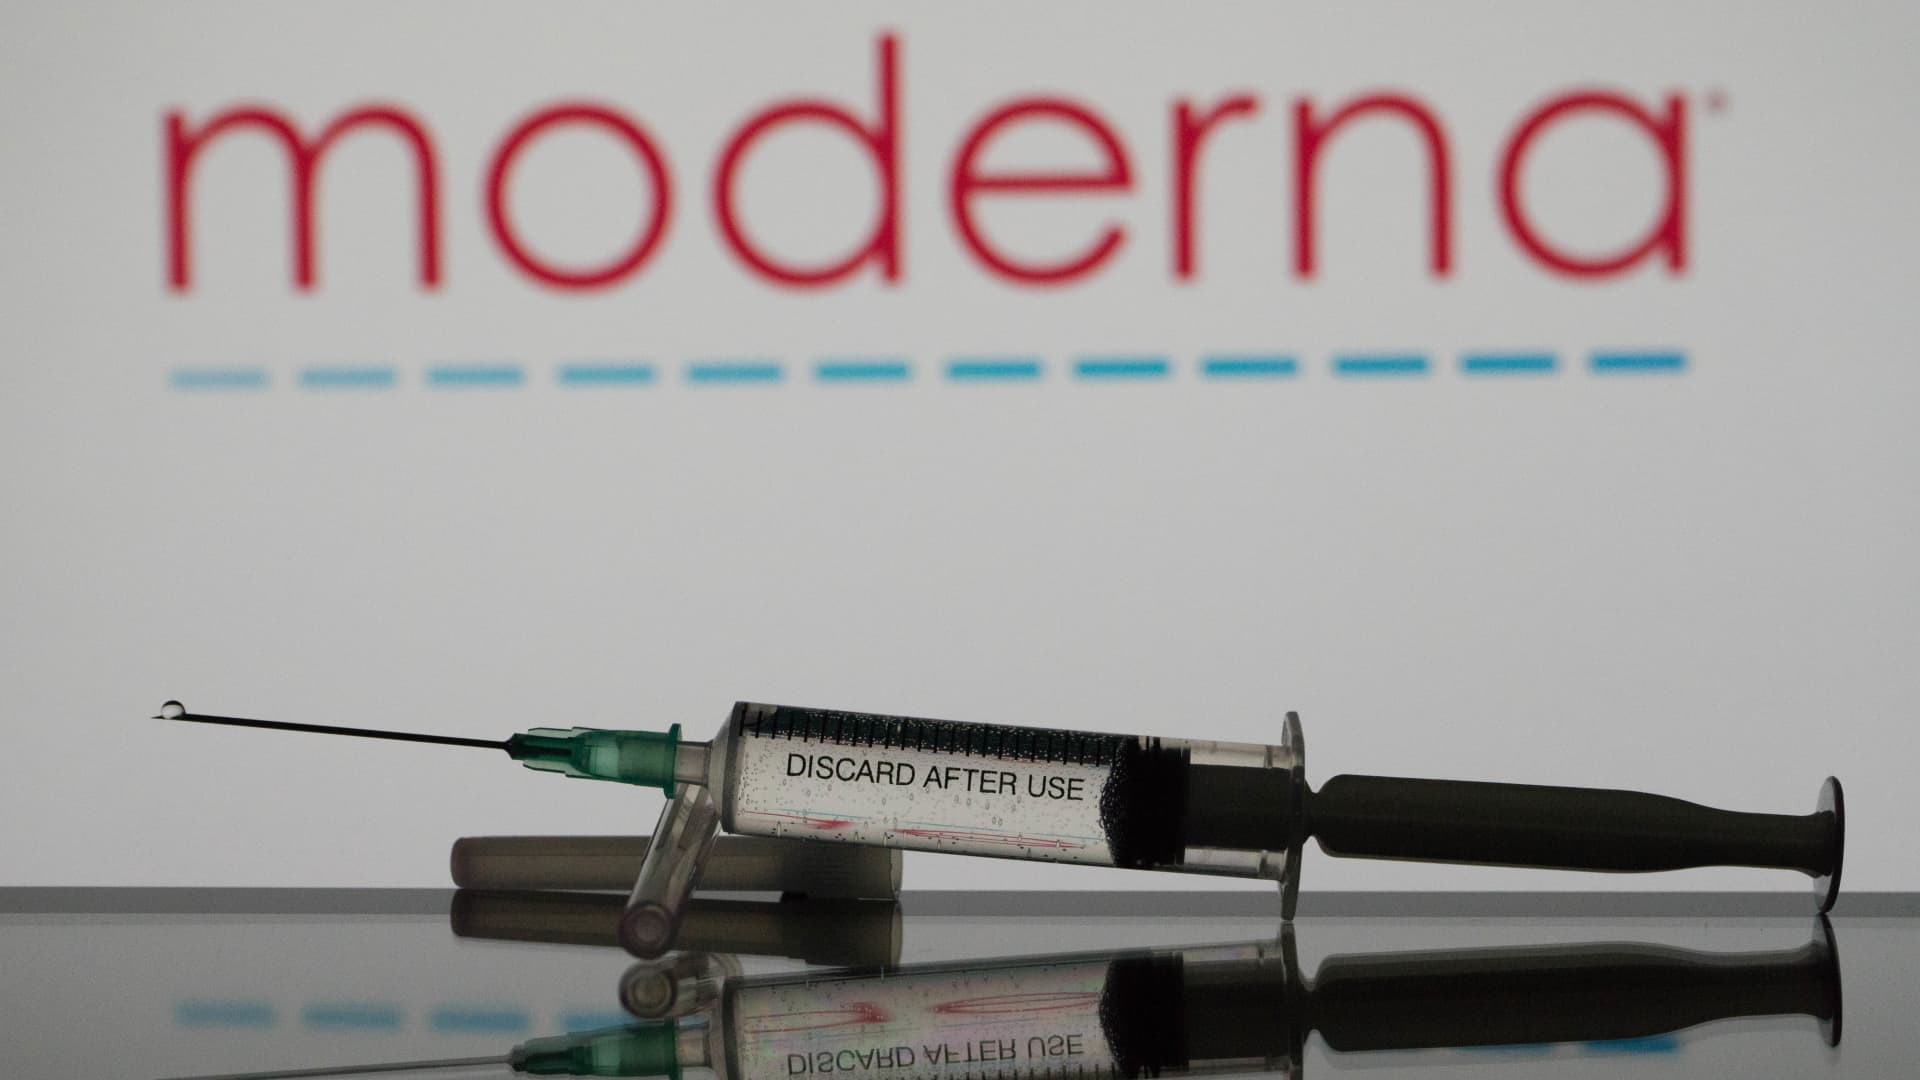 Moderna stock jumps after company posts surprise quarterly profit even as Covid vaccine sales plunge